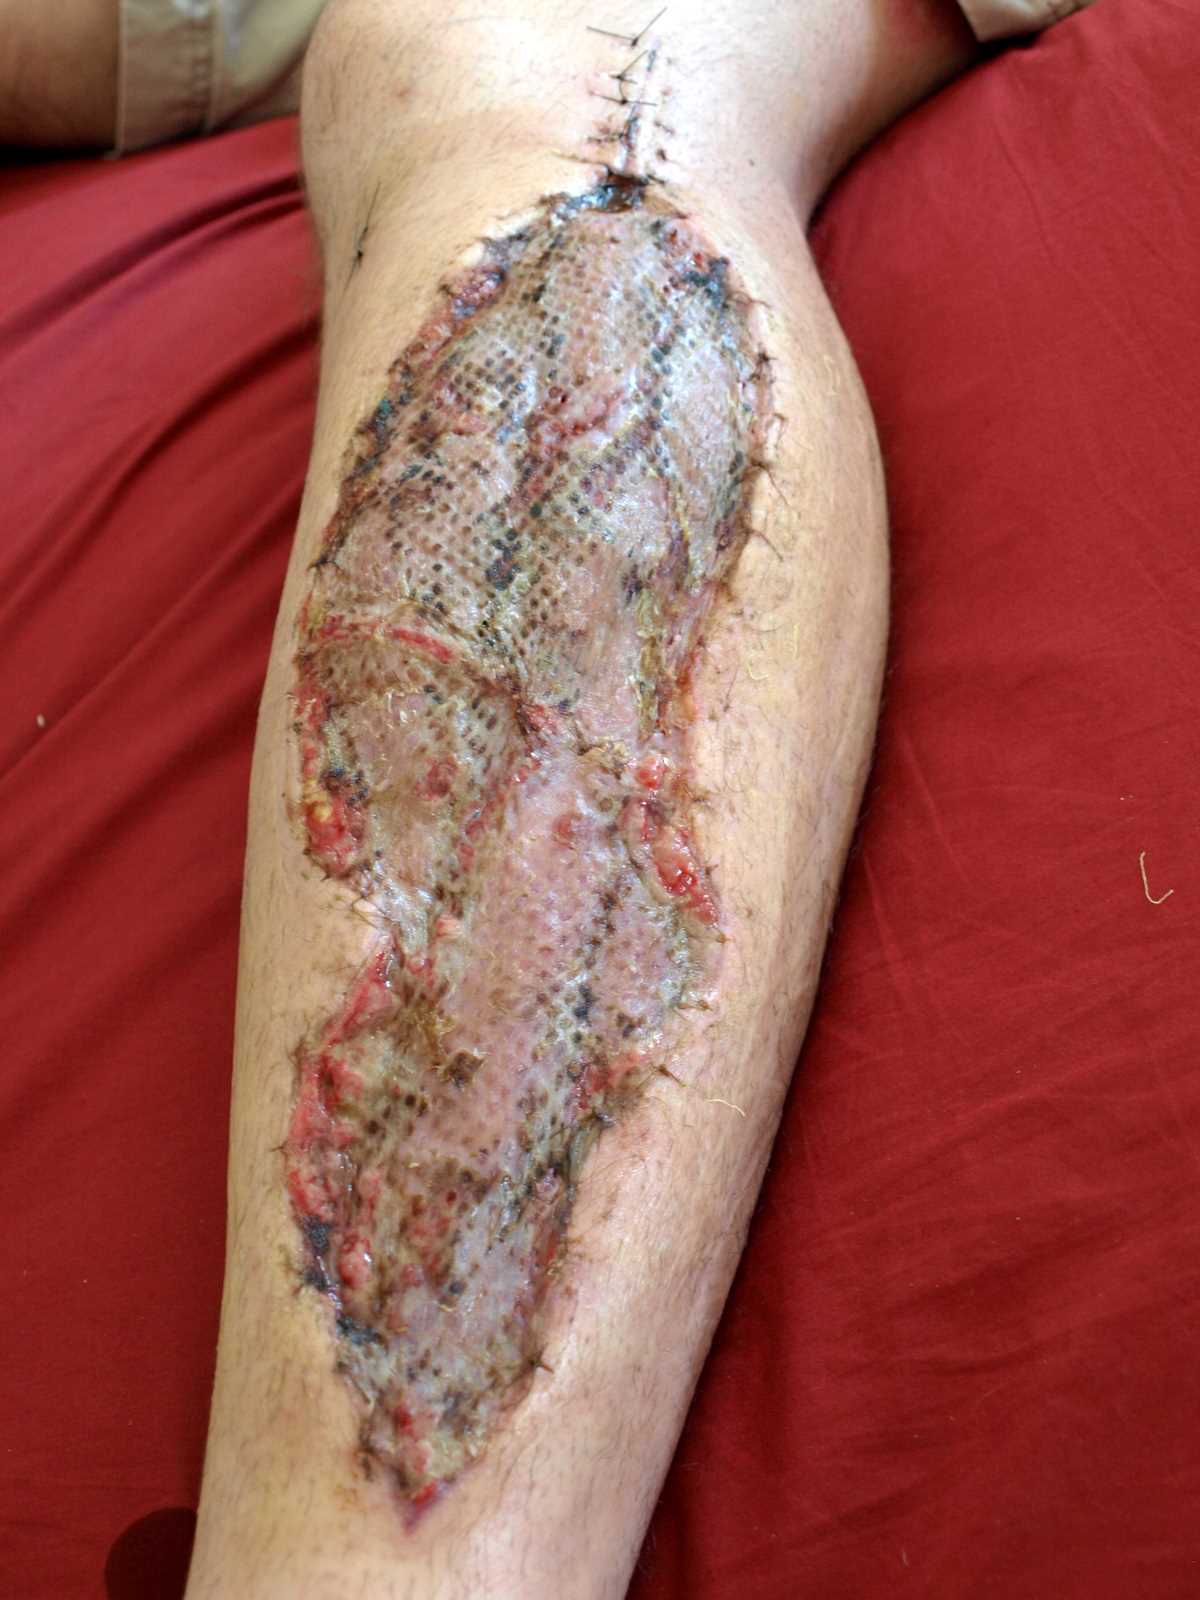 A fasciotomy one week after a skin graft had been applied. Wound was covered with a skin graft once pressure was relieved